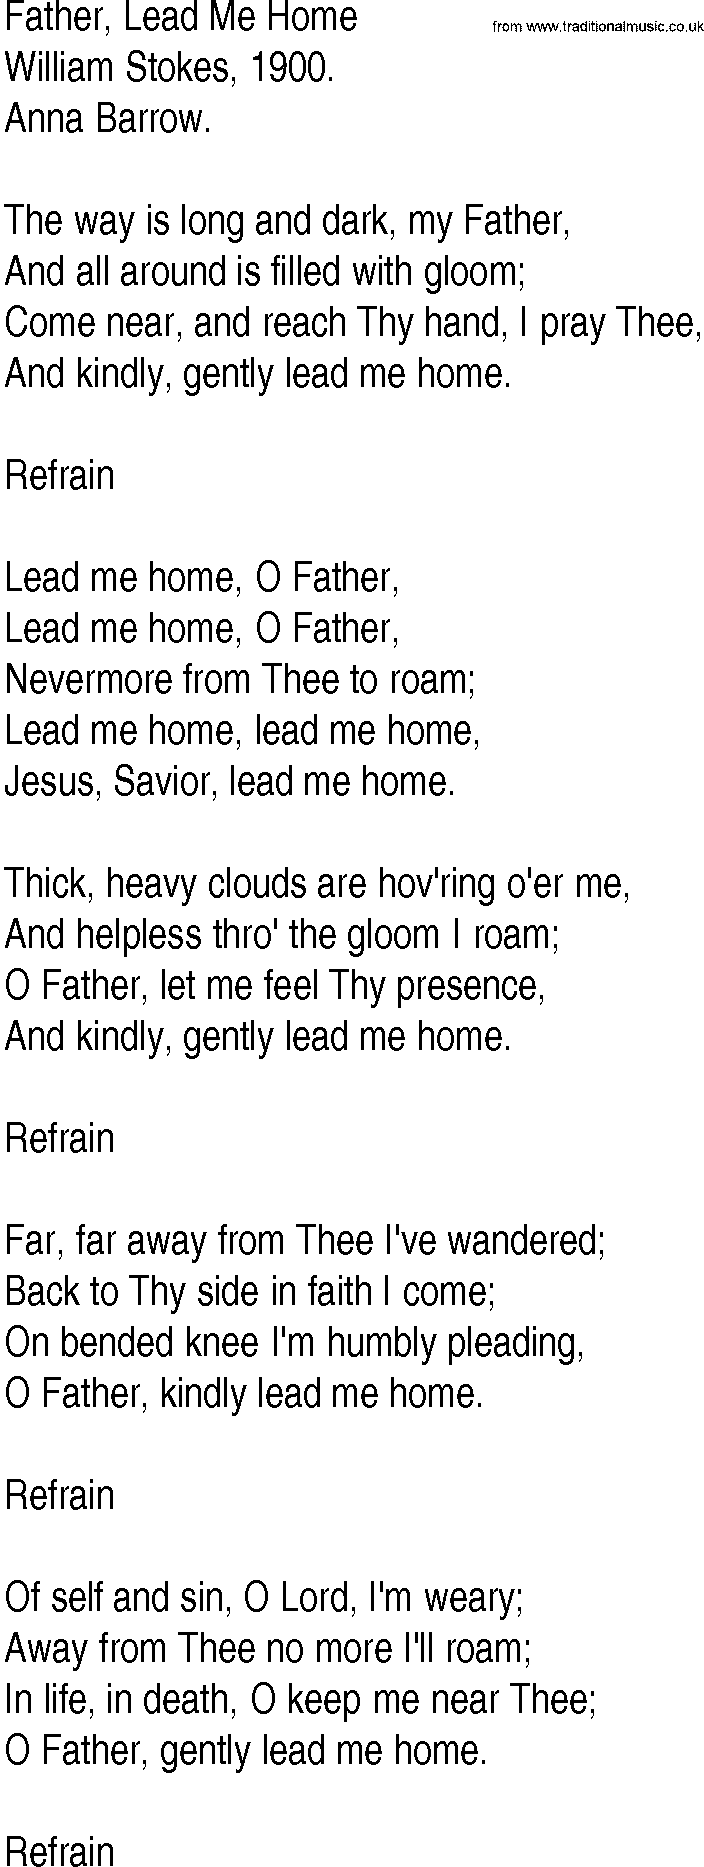 Hymn and Gospel Song: Father, Lead Me Home by William Stokes lyrics